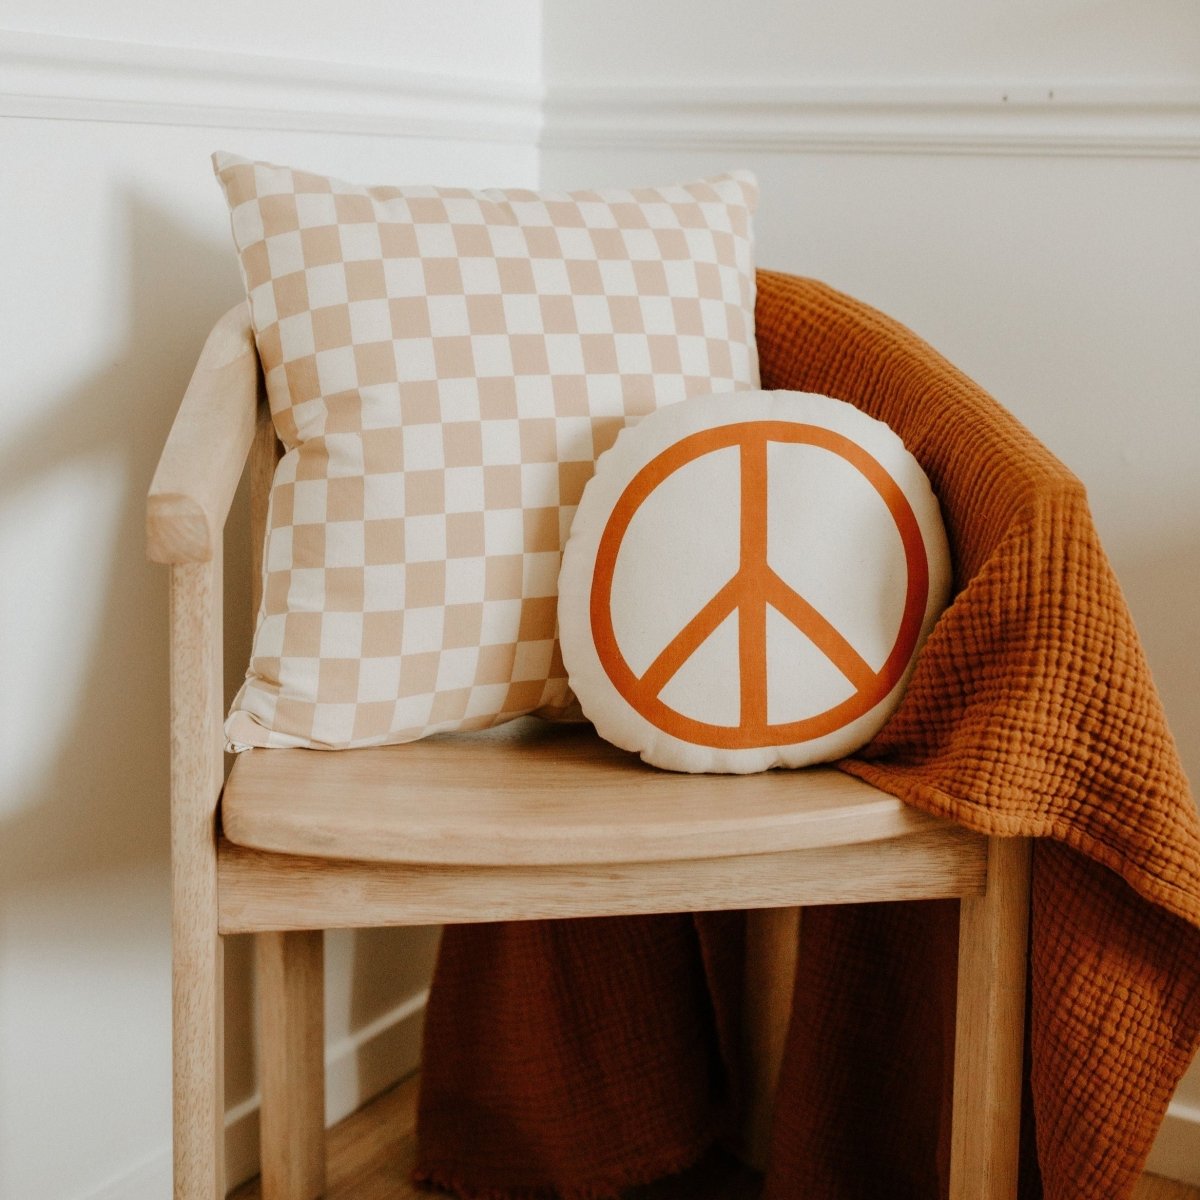 Imani Collective Peace Sign Pillow - lily & onyx